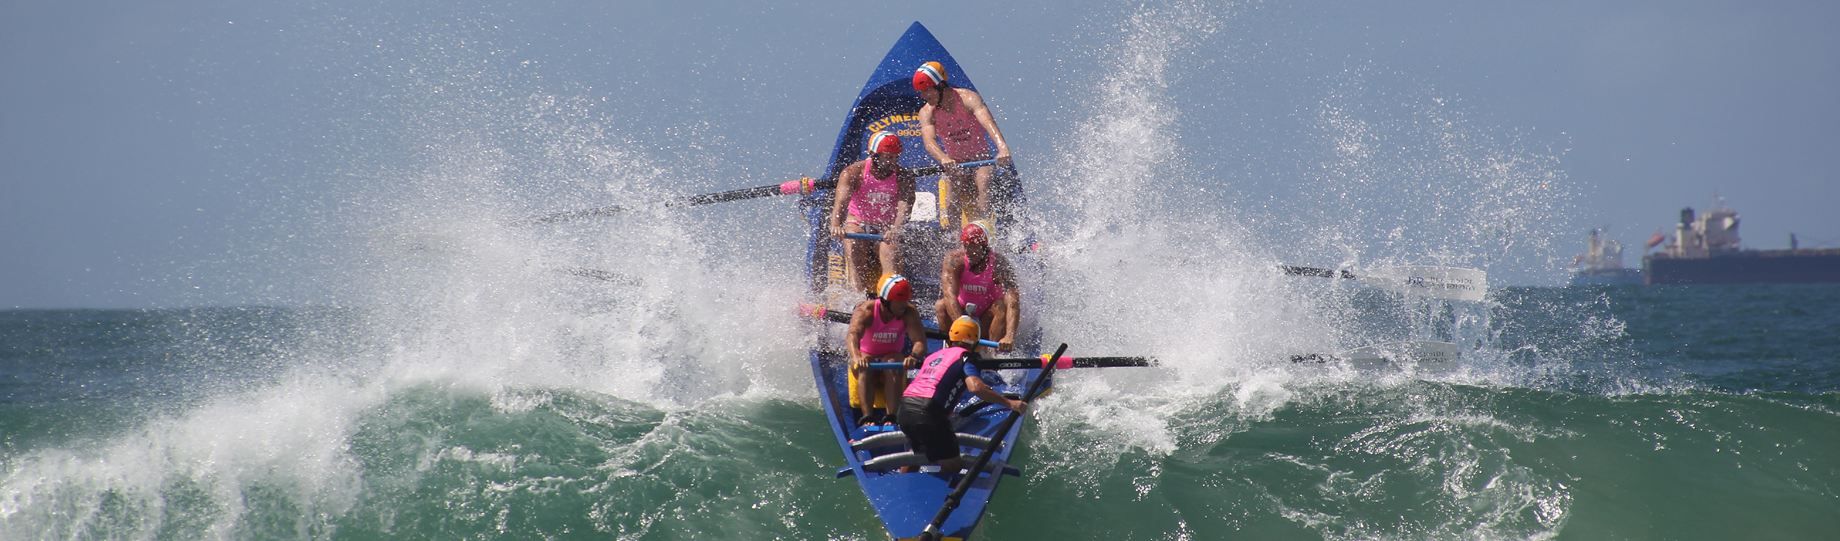 Surf boat competition